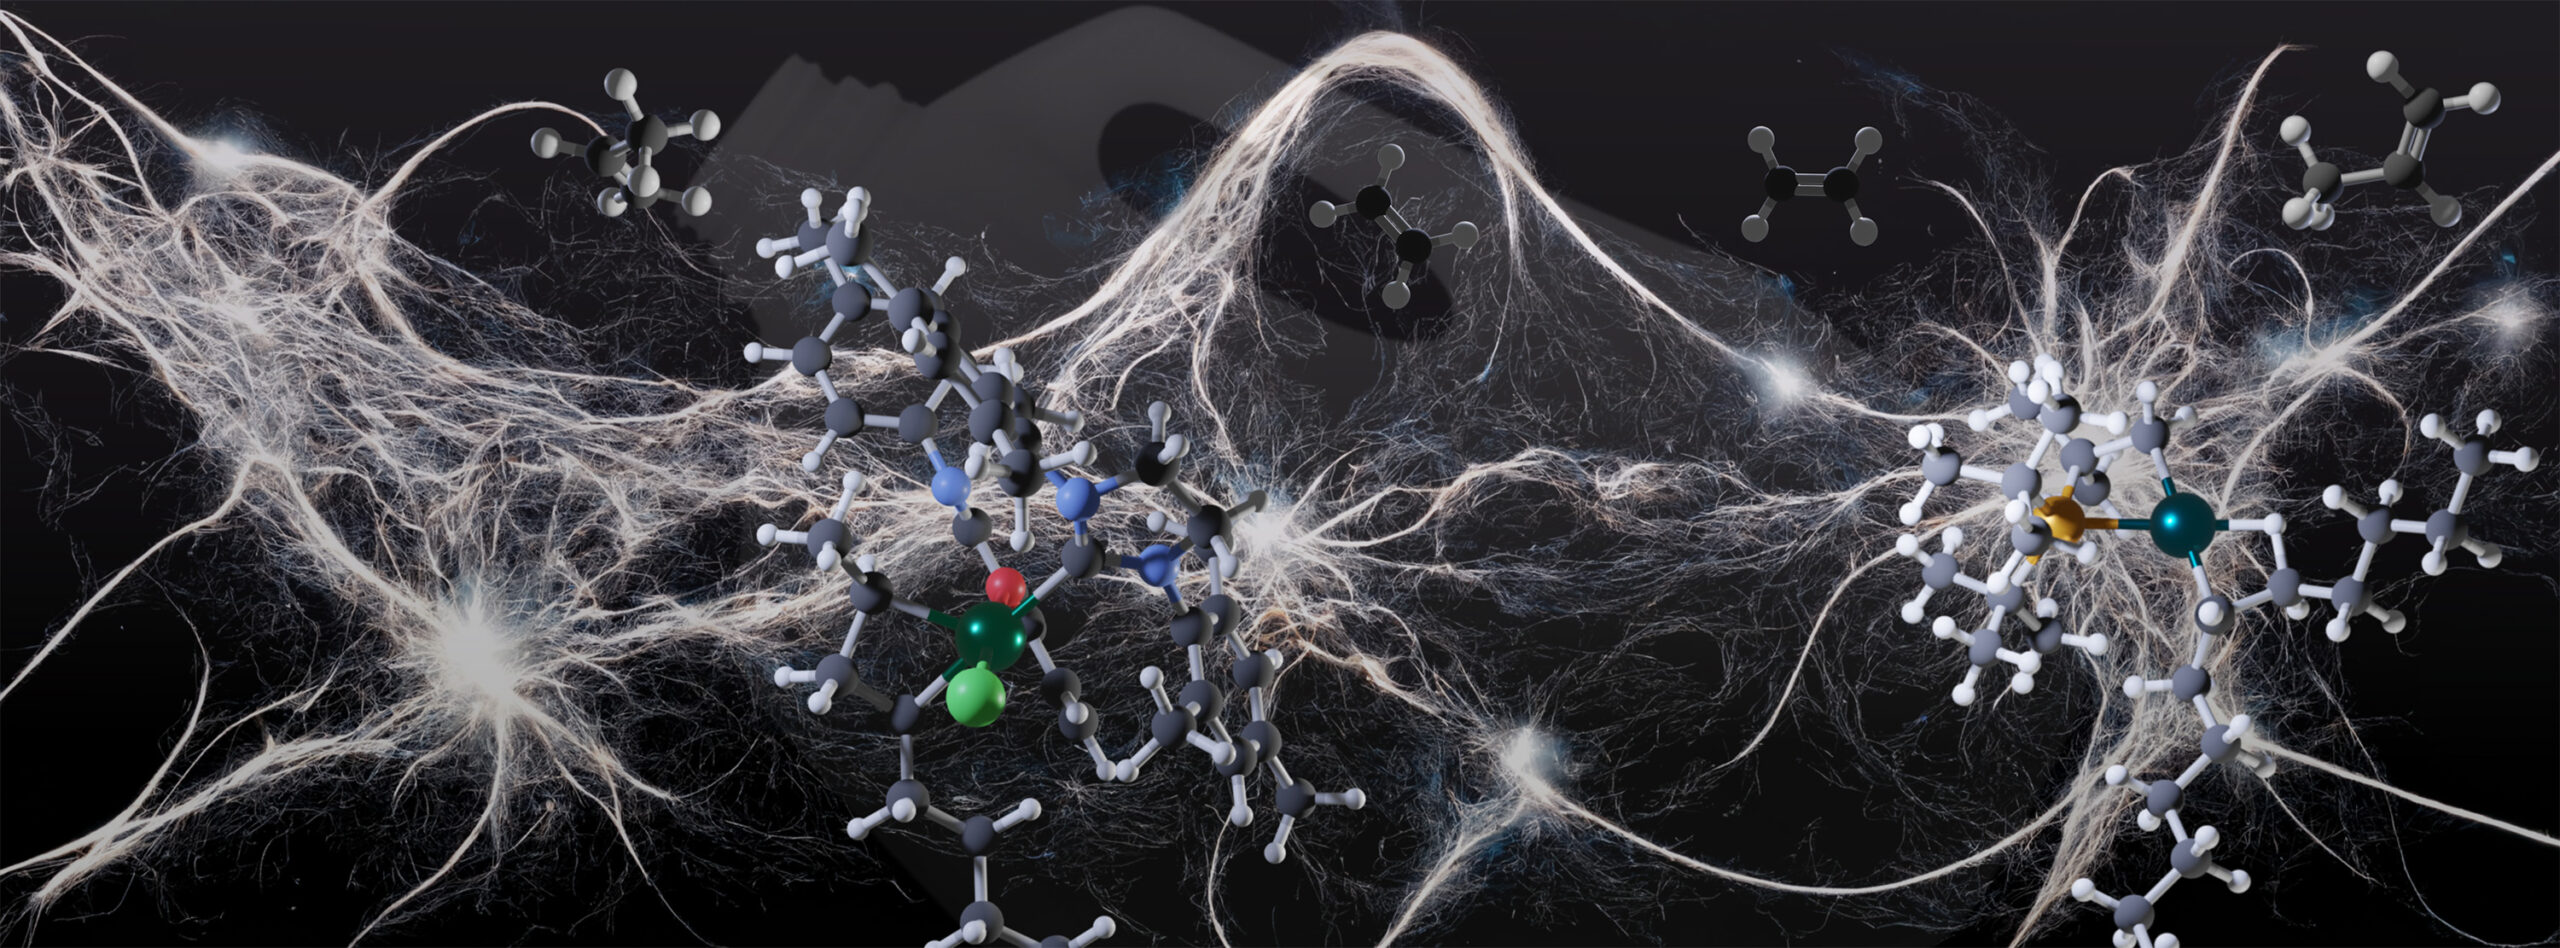 White strands extend from the left side of the photo all the way to the right against a black background, with figures of molecules overlaid on top.